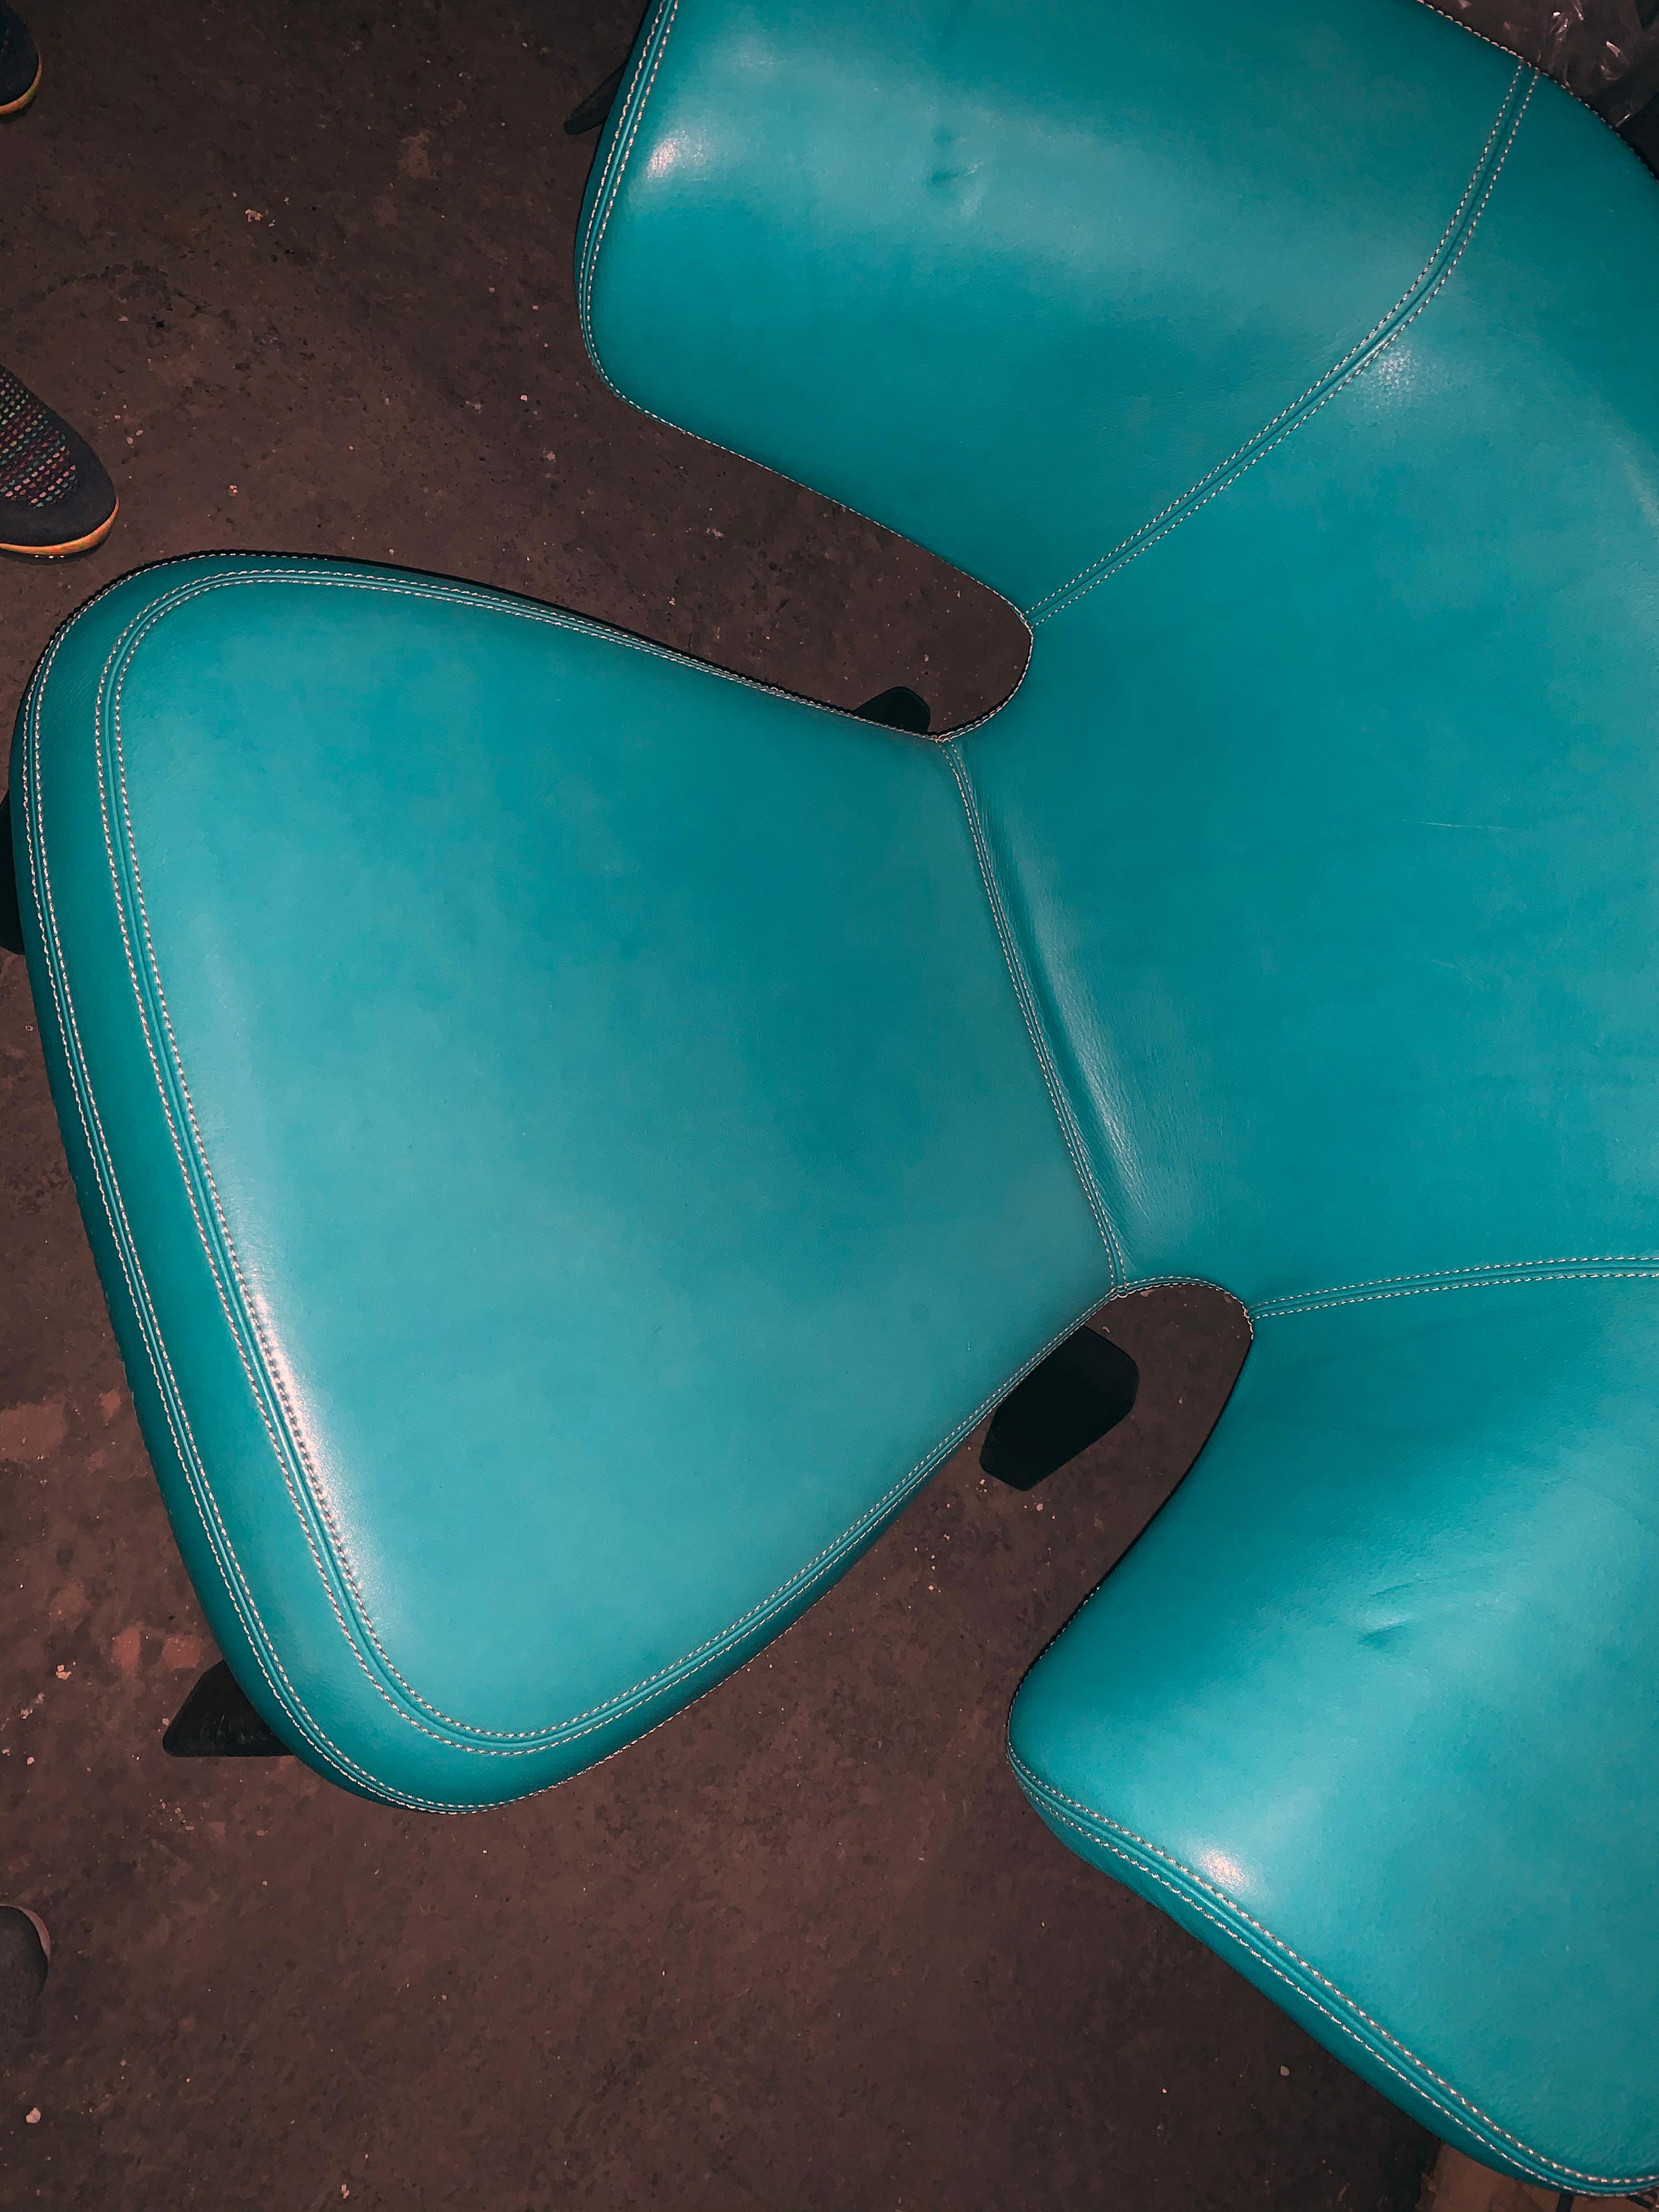 ClassiCon Turquoise Munich Lounge Chair Designed by Sauerbruch Hutton in STOCK For Sale 2